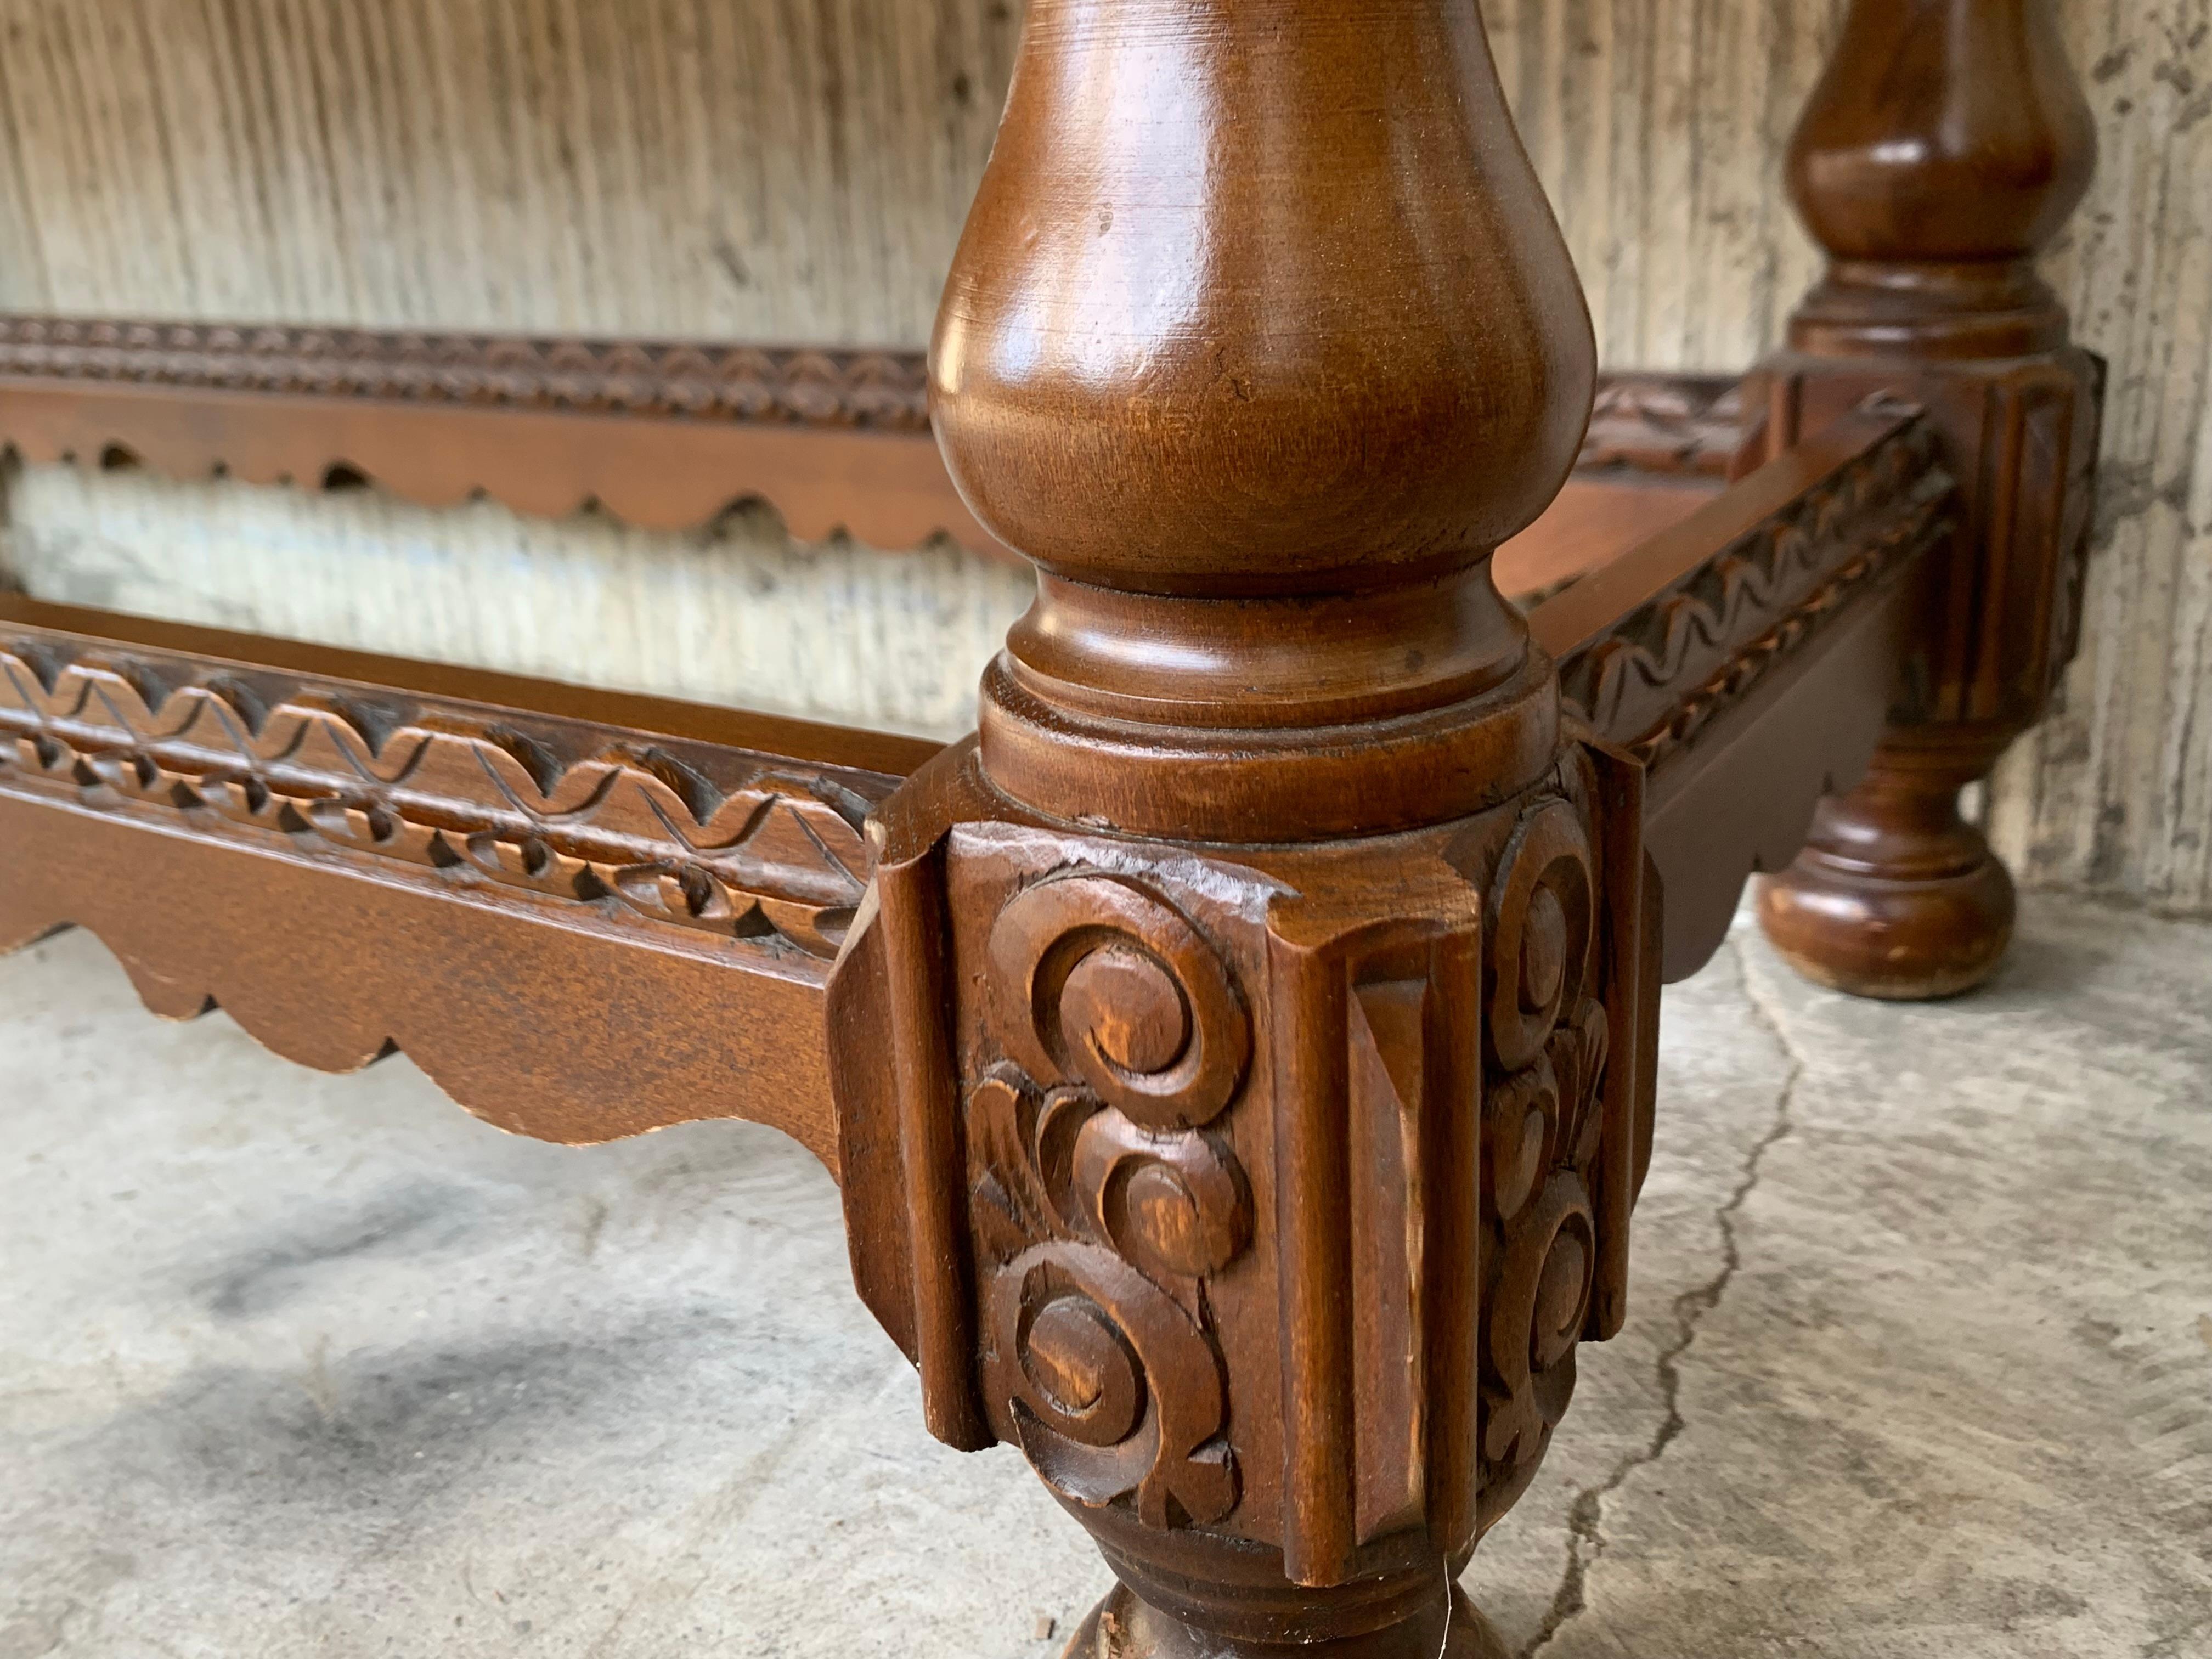 Spanish Console Chest Table with Two Carved Drawers and Original Hardware 5